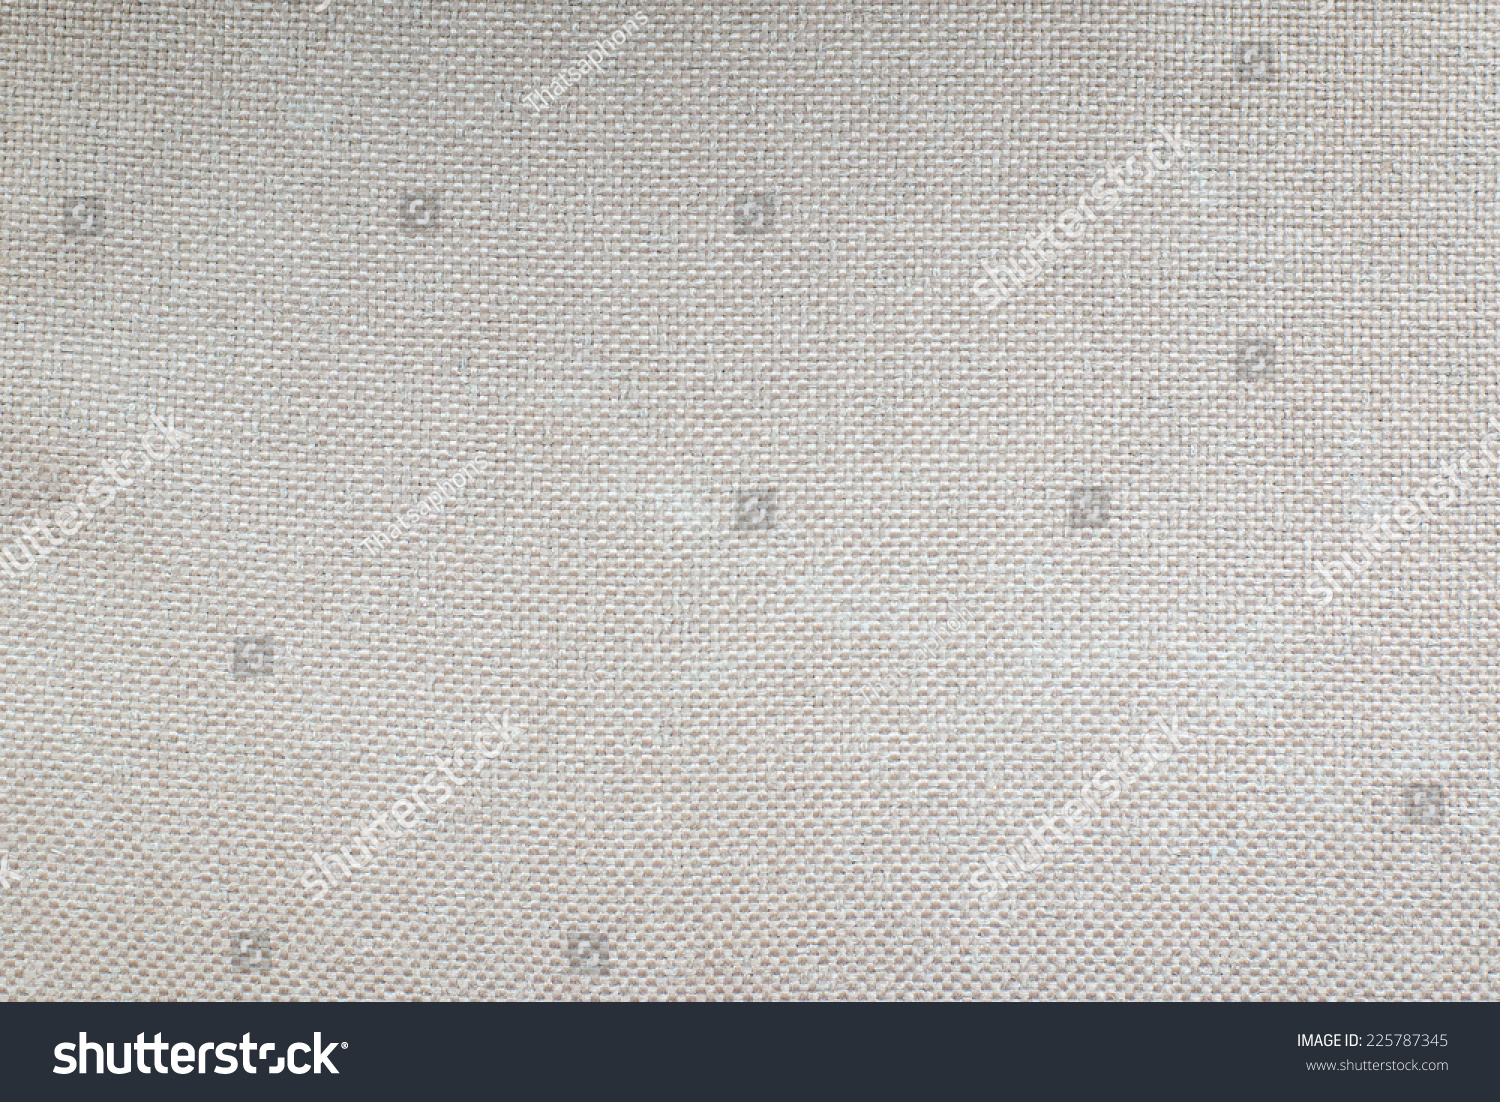 Light Brown Gray Color Fabric Texture Background Stock Photo 225787345 ...